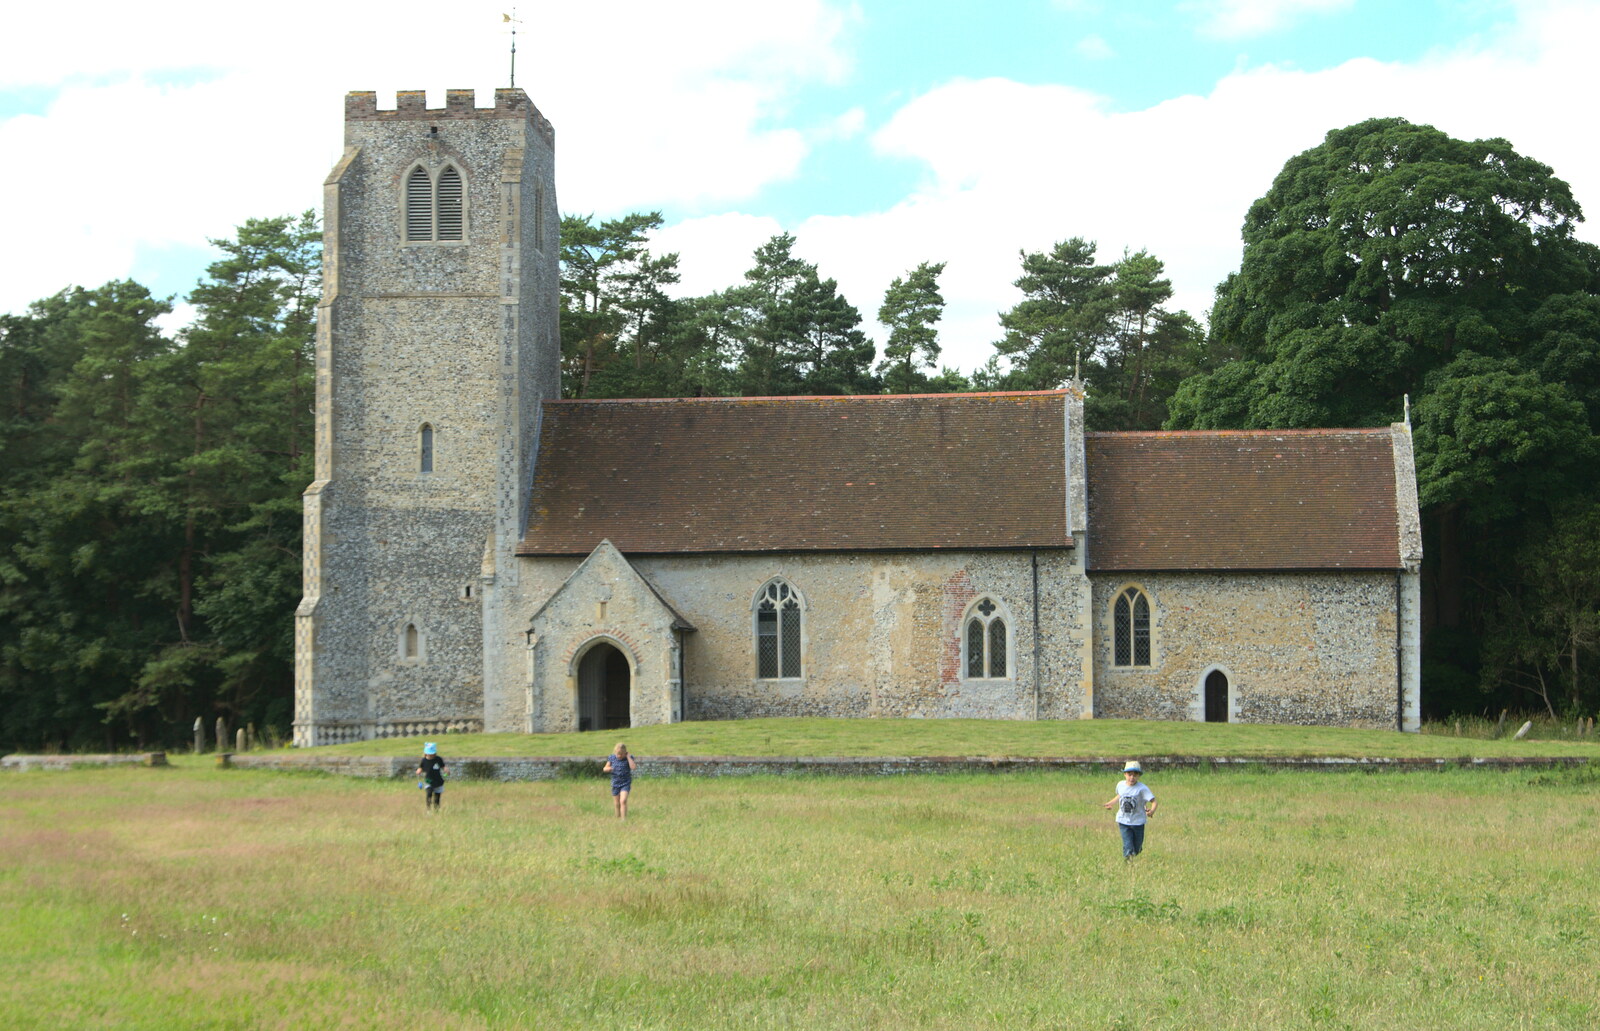 All Saints in West Harling from Camping at Dower House, West Harling, Norfolk - 1st July 2017